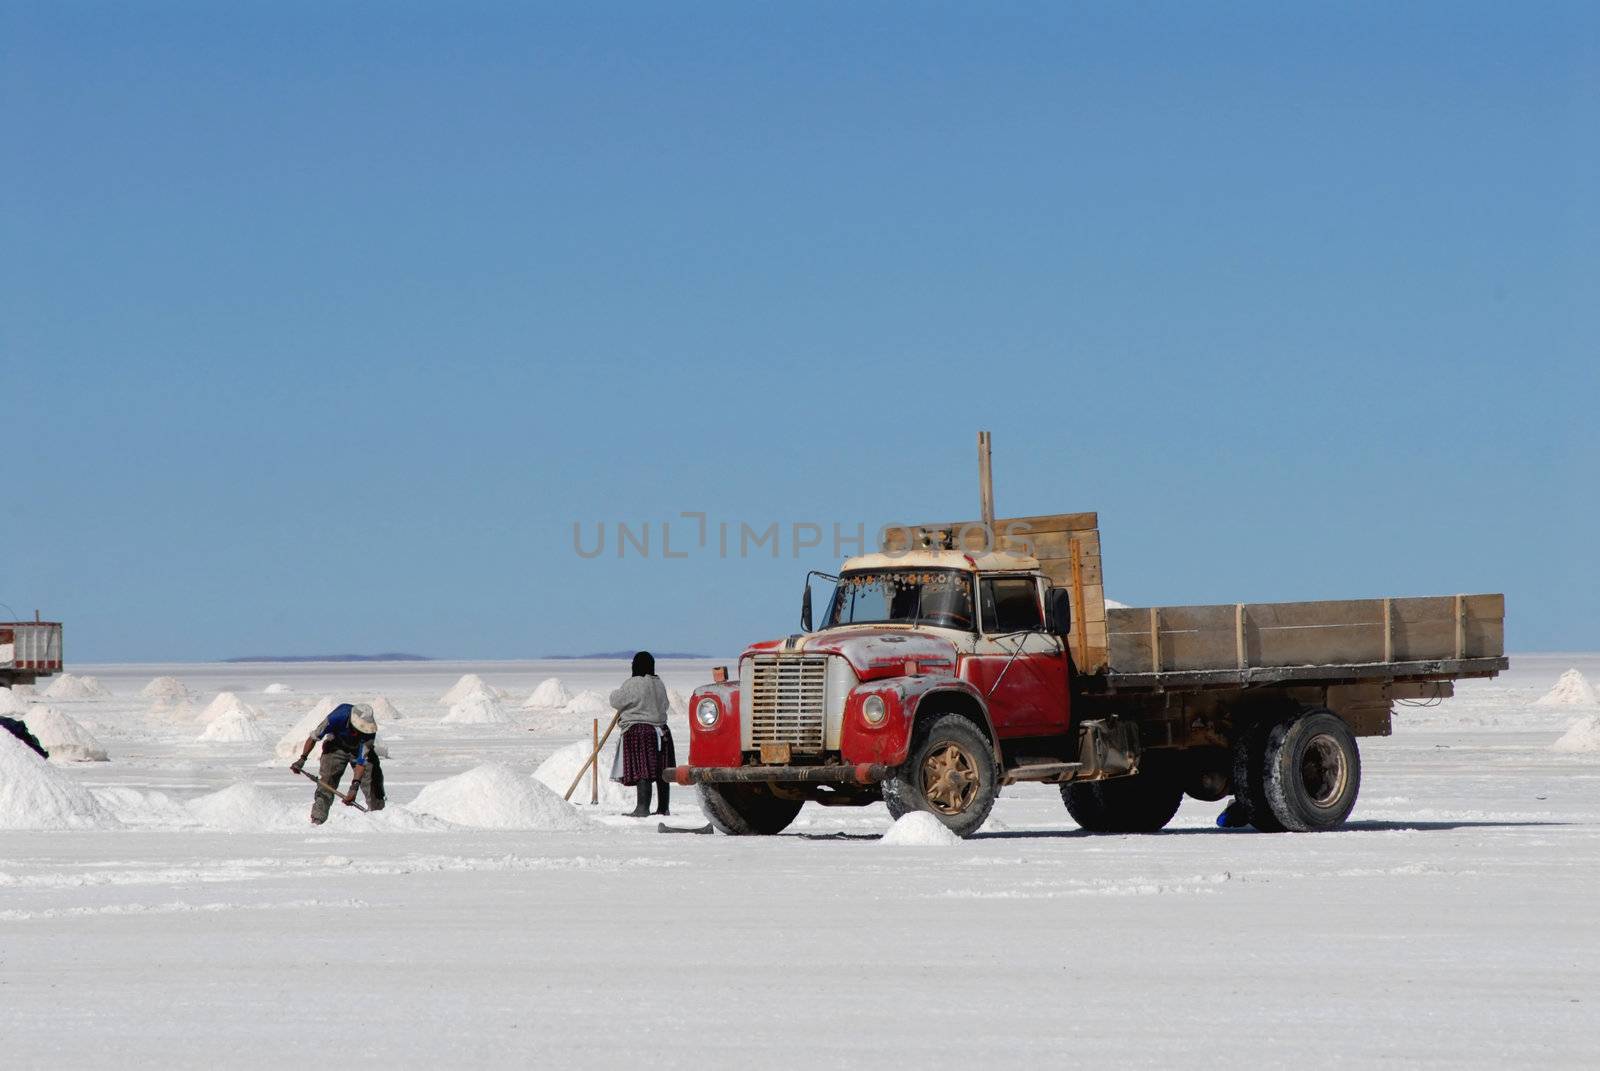 Uyuni, Bolivia May 22, 2009: men who collect the salt in the salt of Uyuni. The Salar de Uyuni salt desert is a huge one of the world's largest salt works its surface of 11,000 square kilometers







salt, salt desert, Bolivian, truck load, workers, Bolivian women, men,







salar